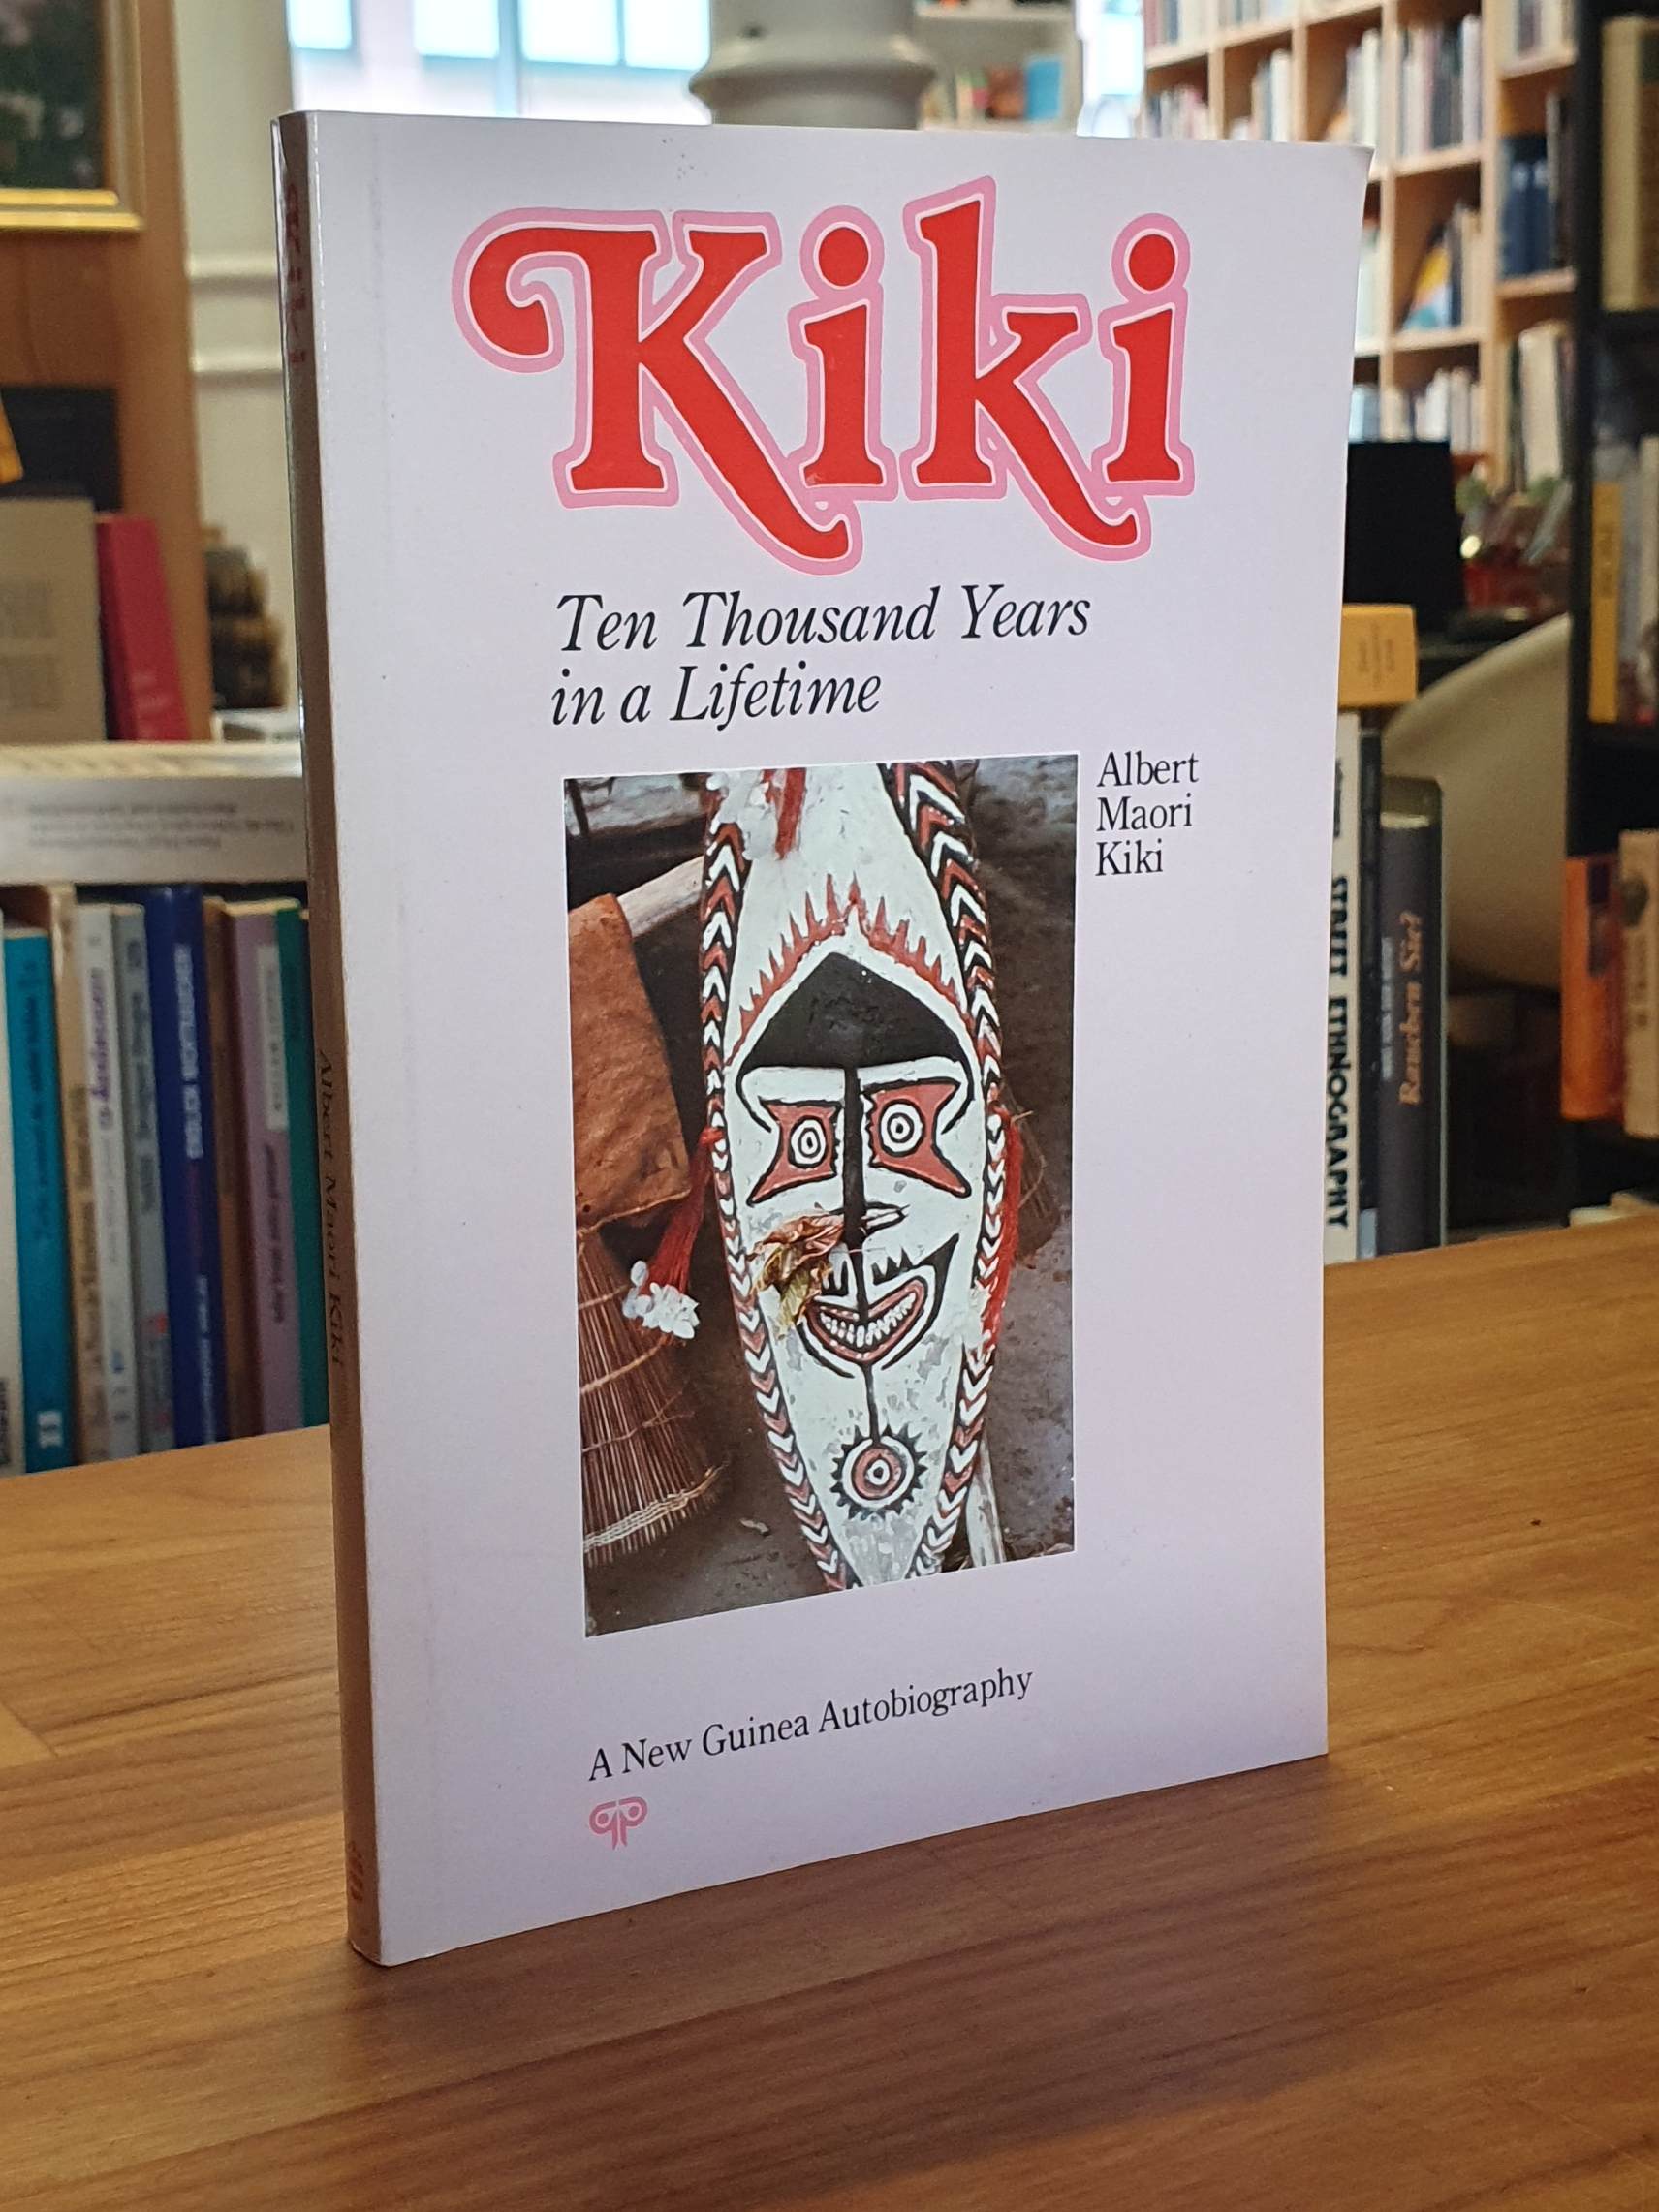 Michael Challinger, Kiki – Then Thousand Years In A Lifetime – A New Guinea Auto